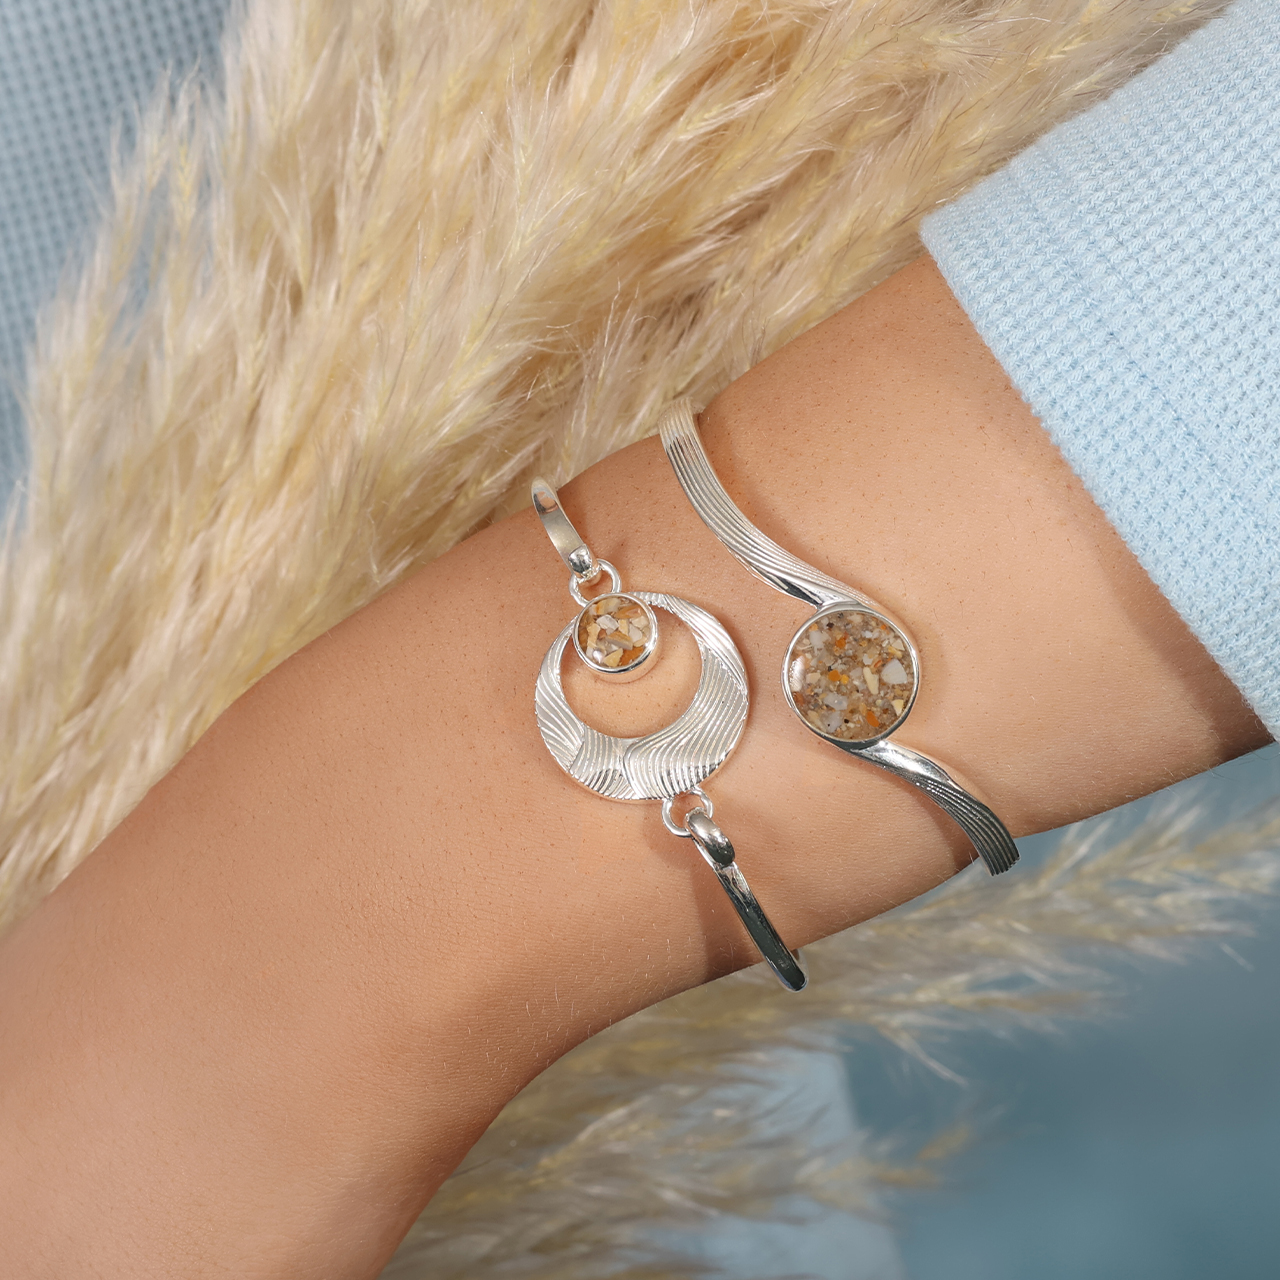 Sterling silver hinge bracelet with hooks and a circular wave textured bracelet charm with a small round sand setting.